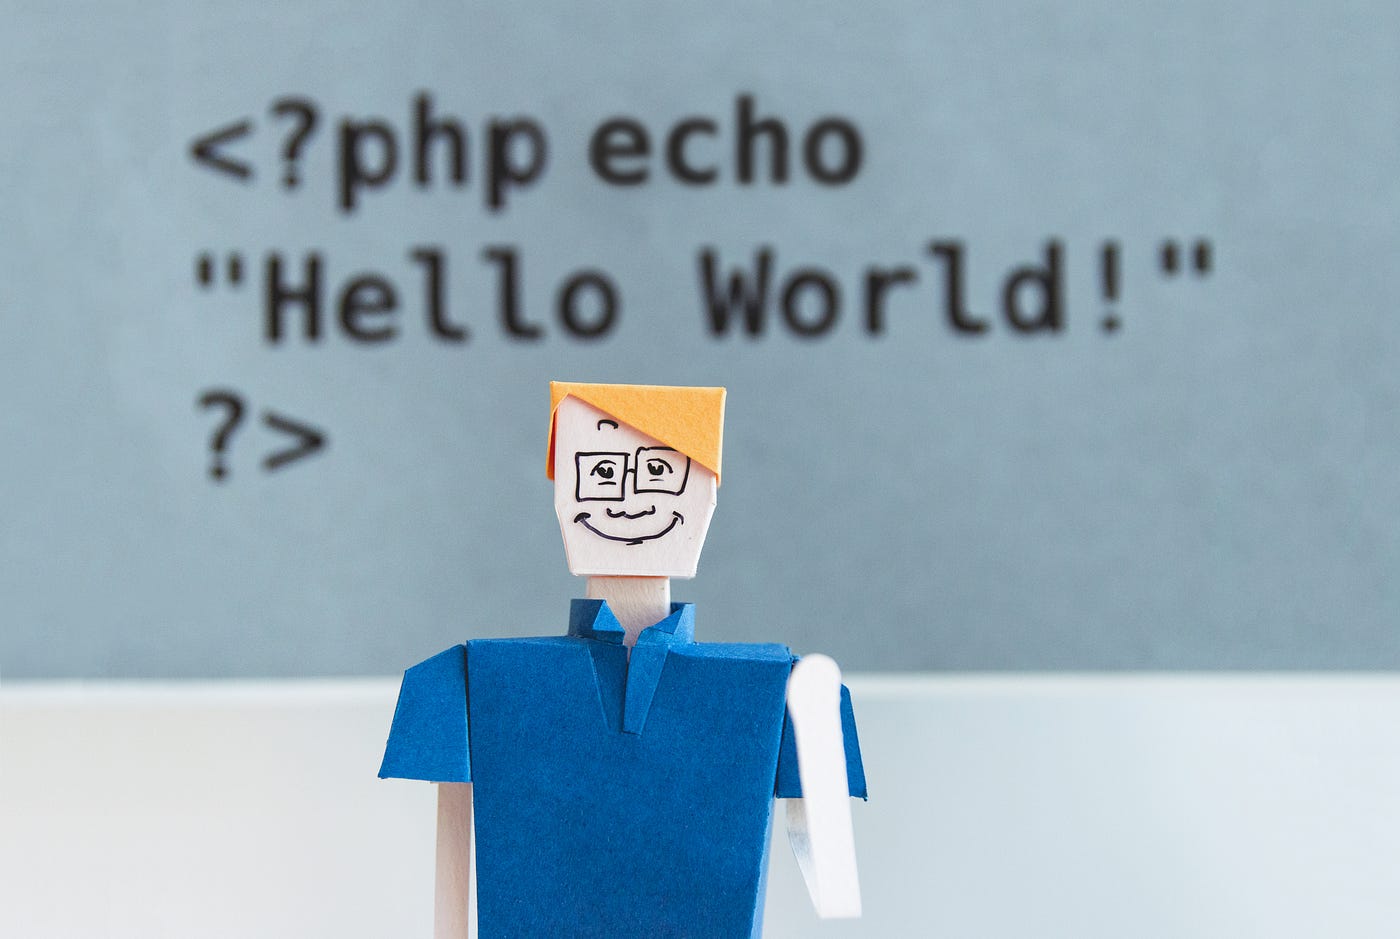 Stop using “extends” in PHP